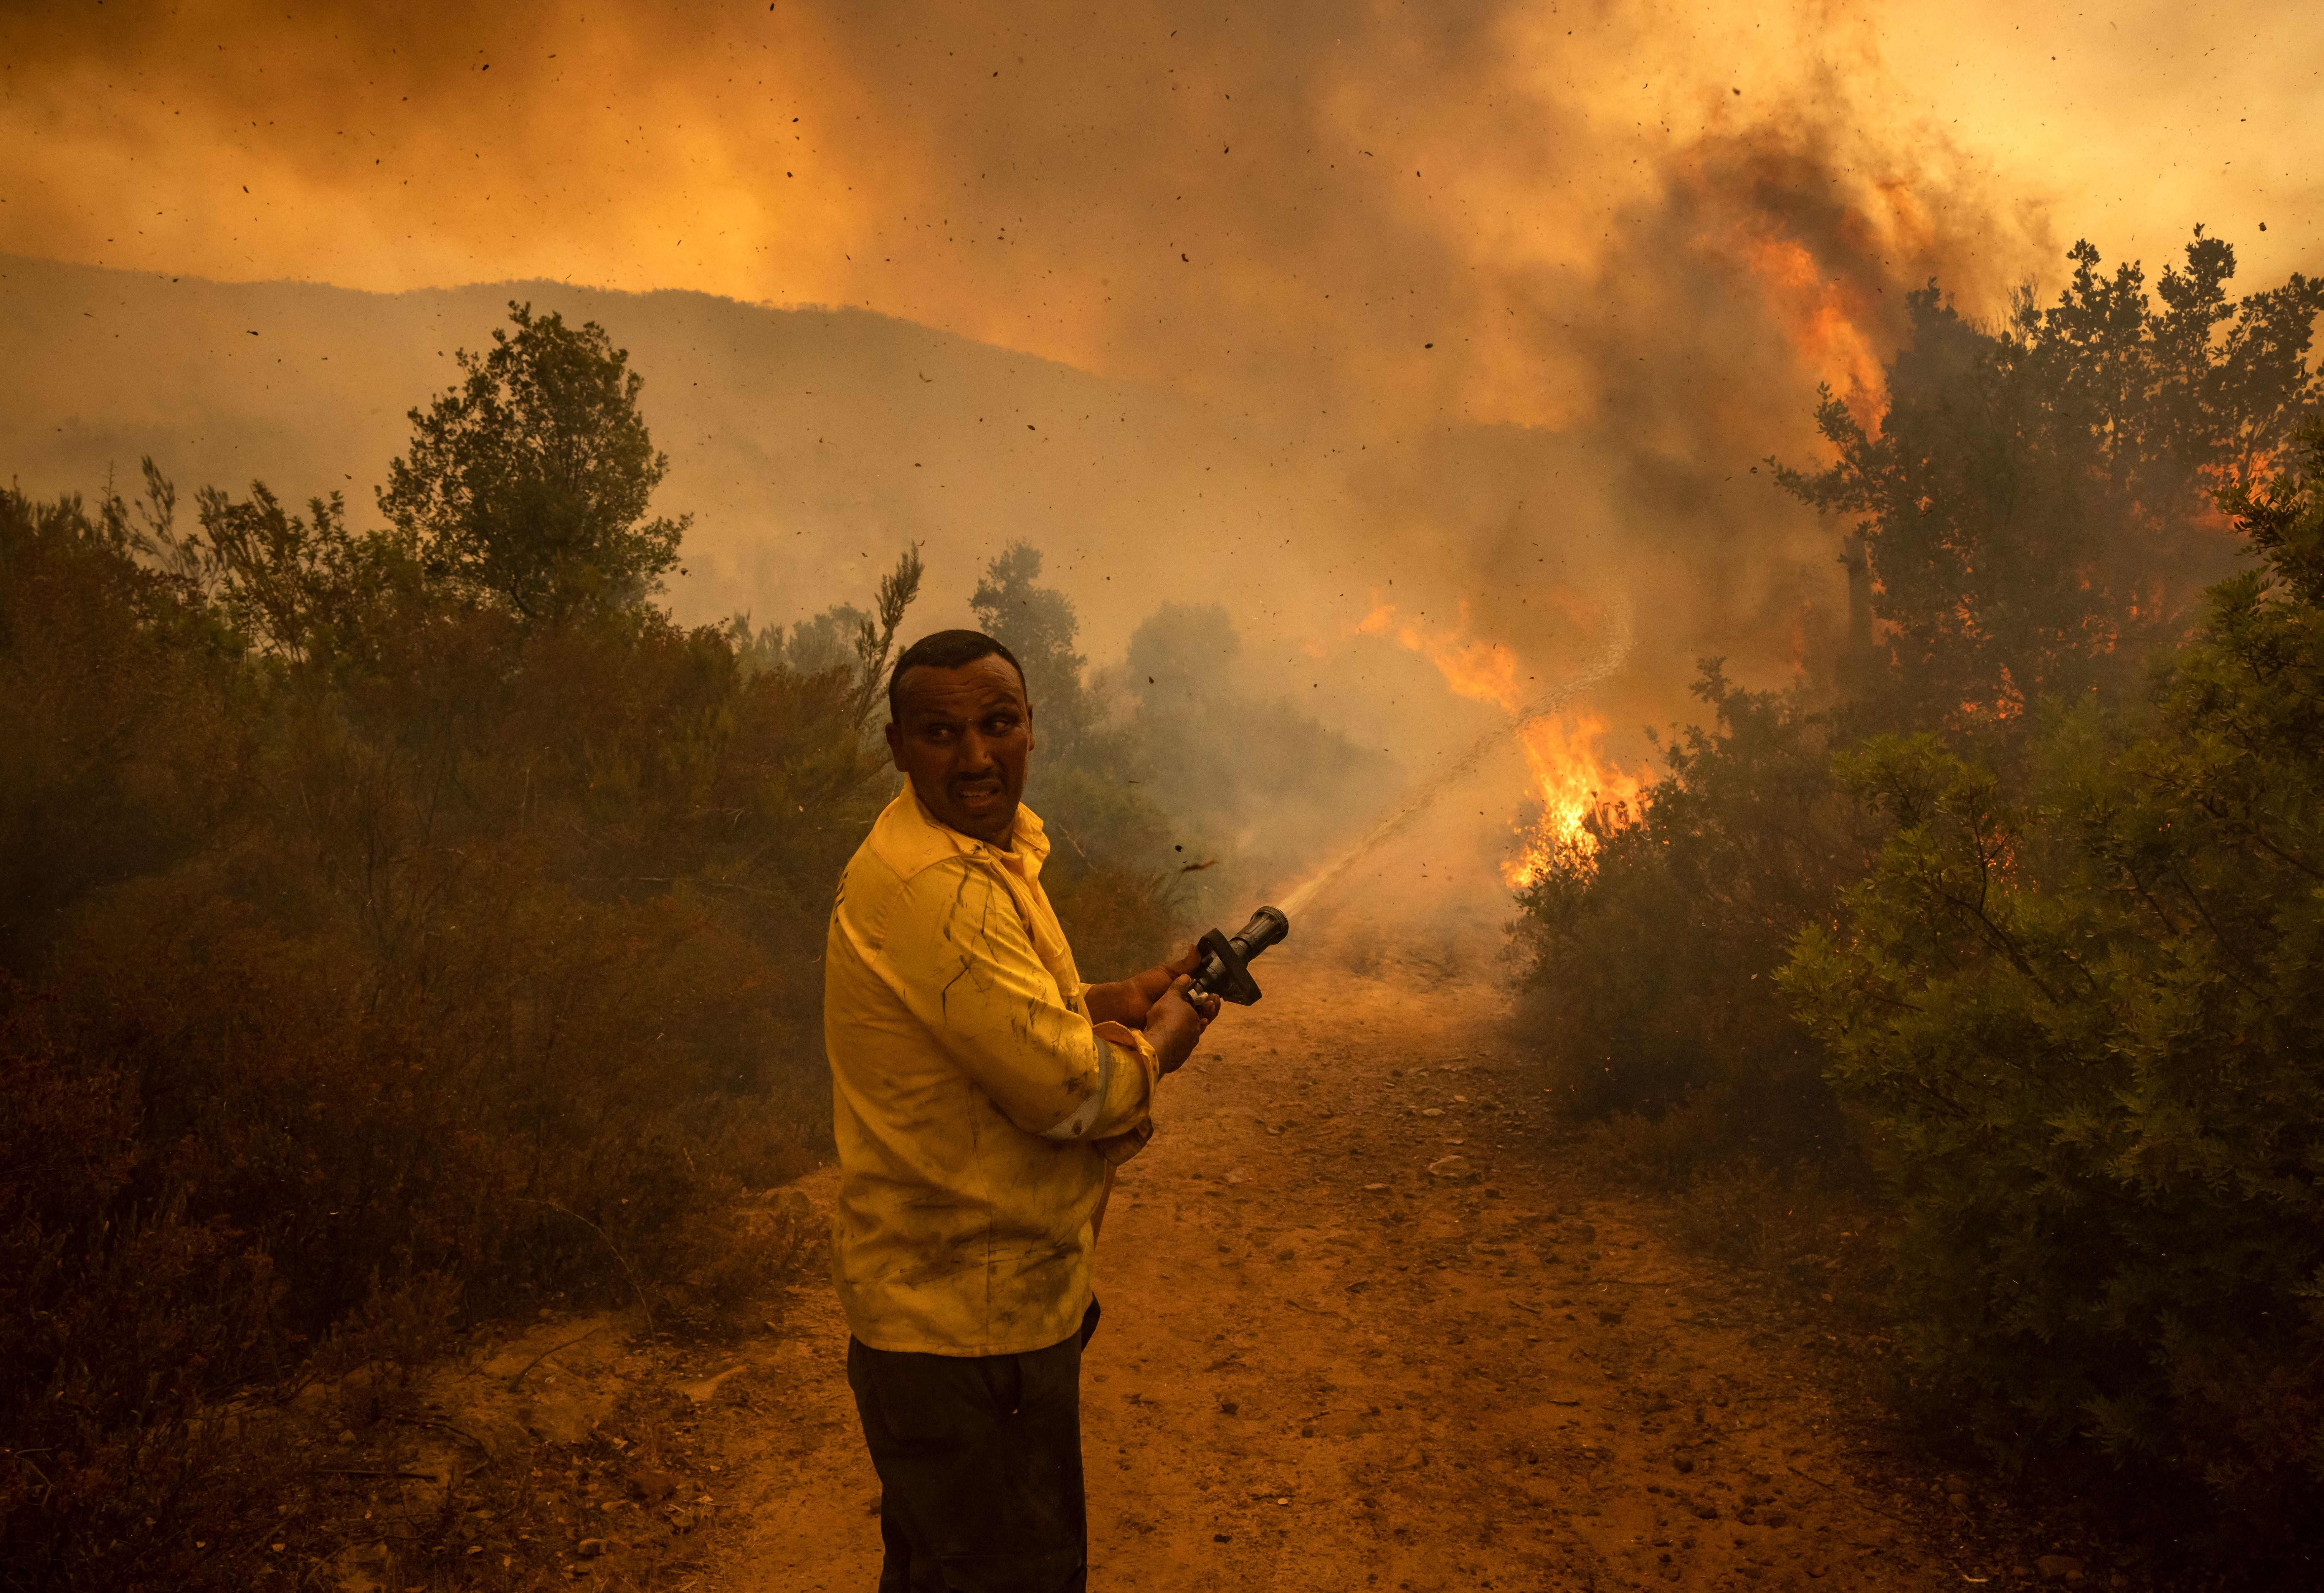 A forest ranger sprays water from a hose on a forest fire near the Moroccan city of Ksar el-Kebir in the Larache region, on July 15.